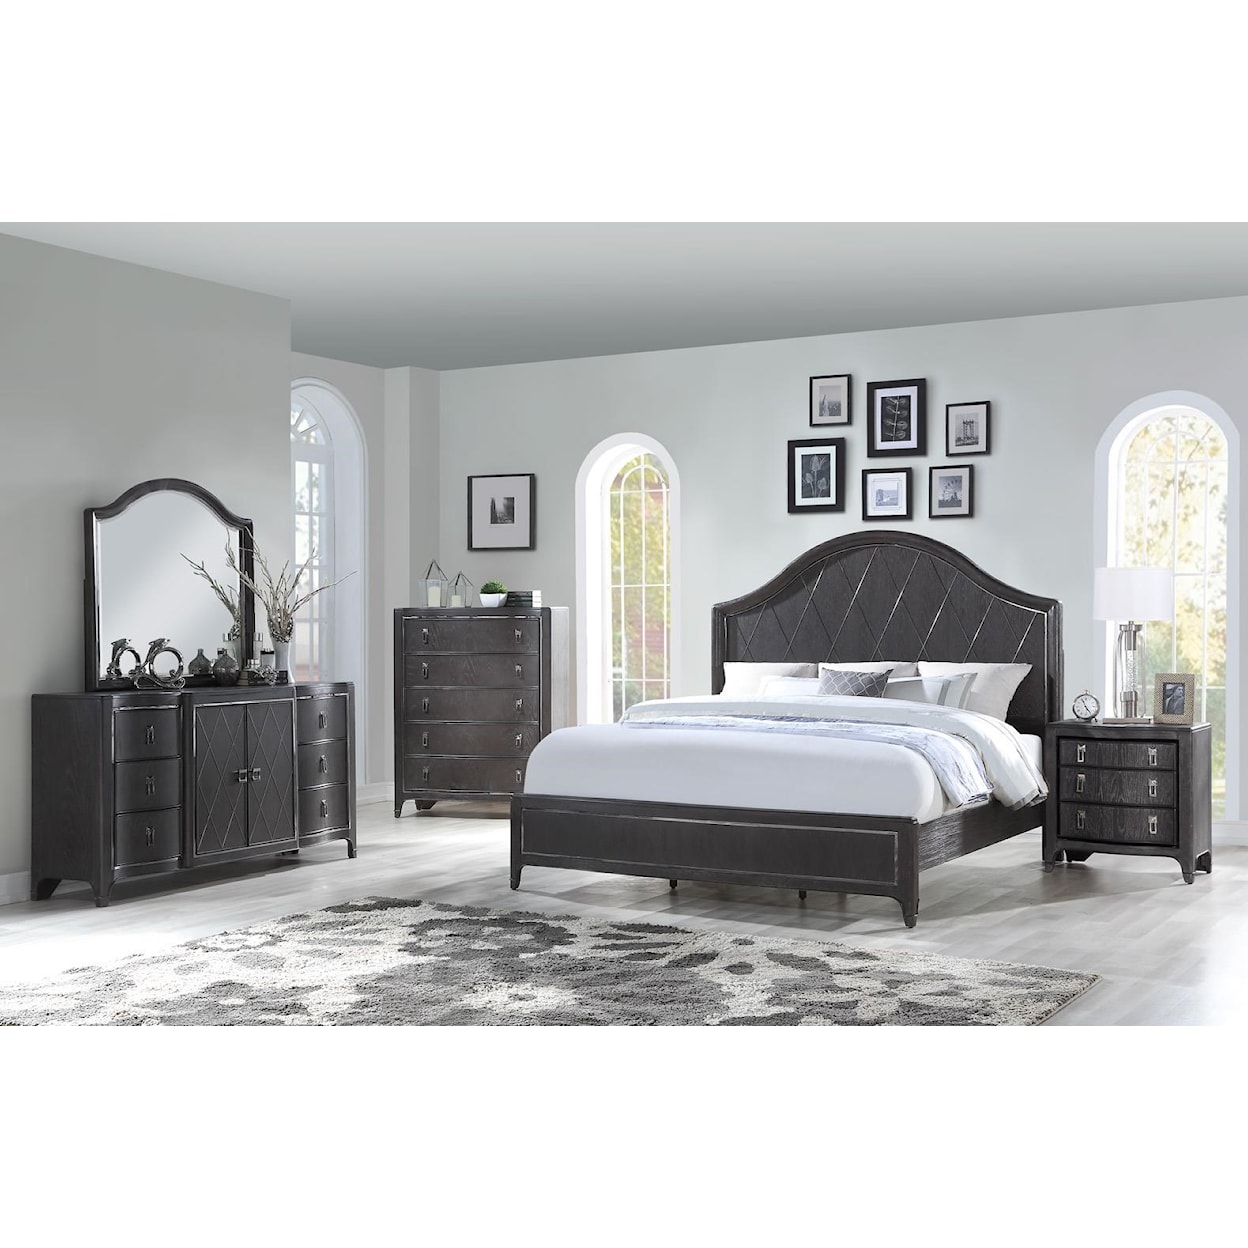 Home Insights Harbor Town Dresser with Doors